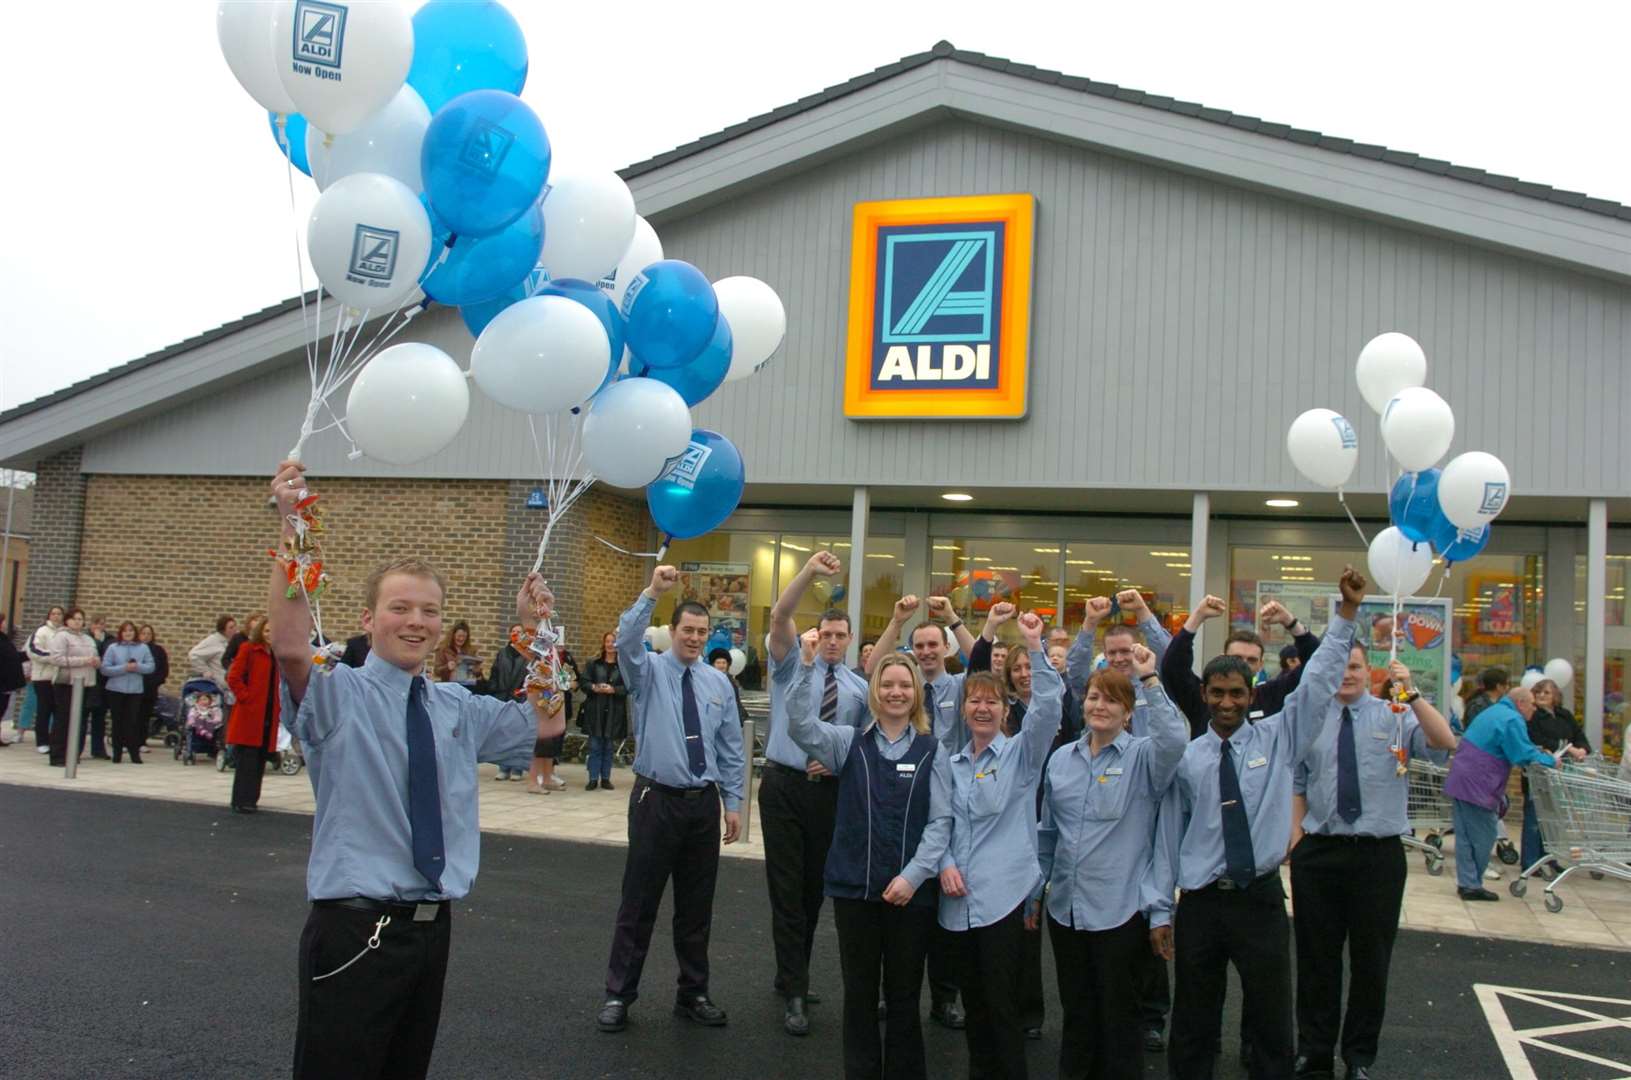 The official opening of new Aldi Store in Millennium Way, Sheerness, in 2005